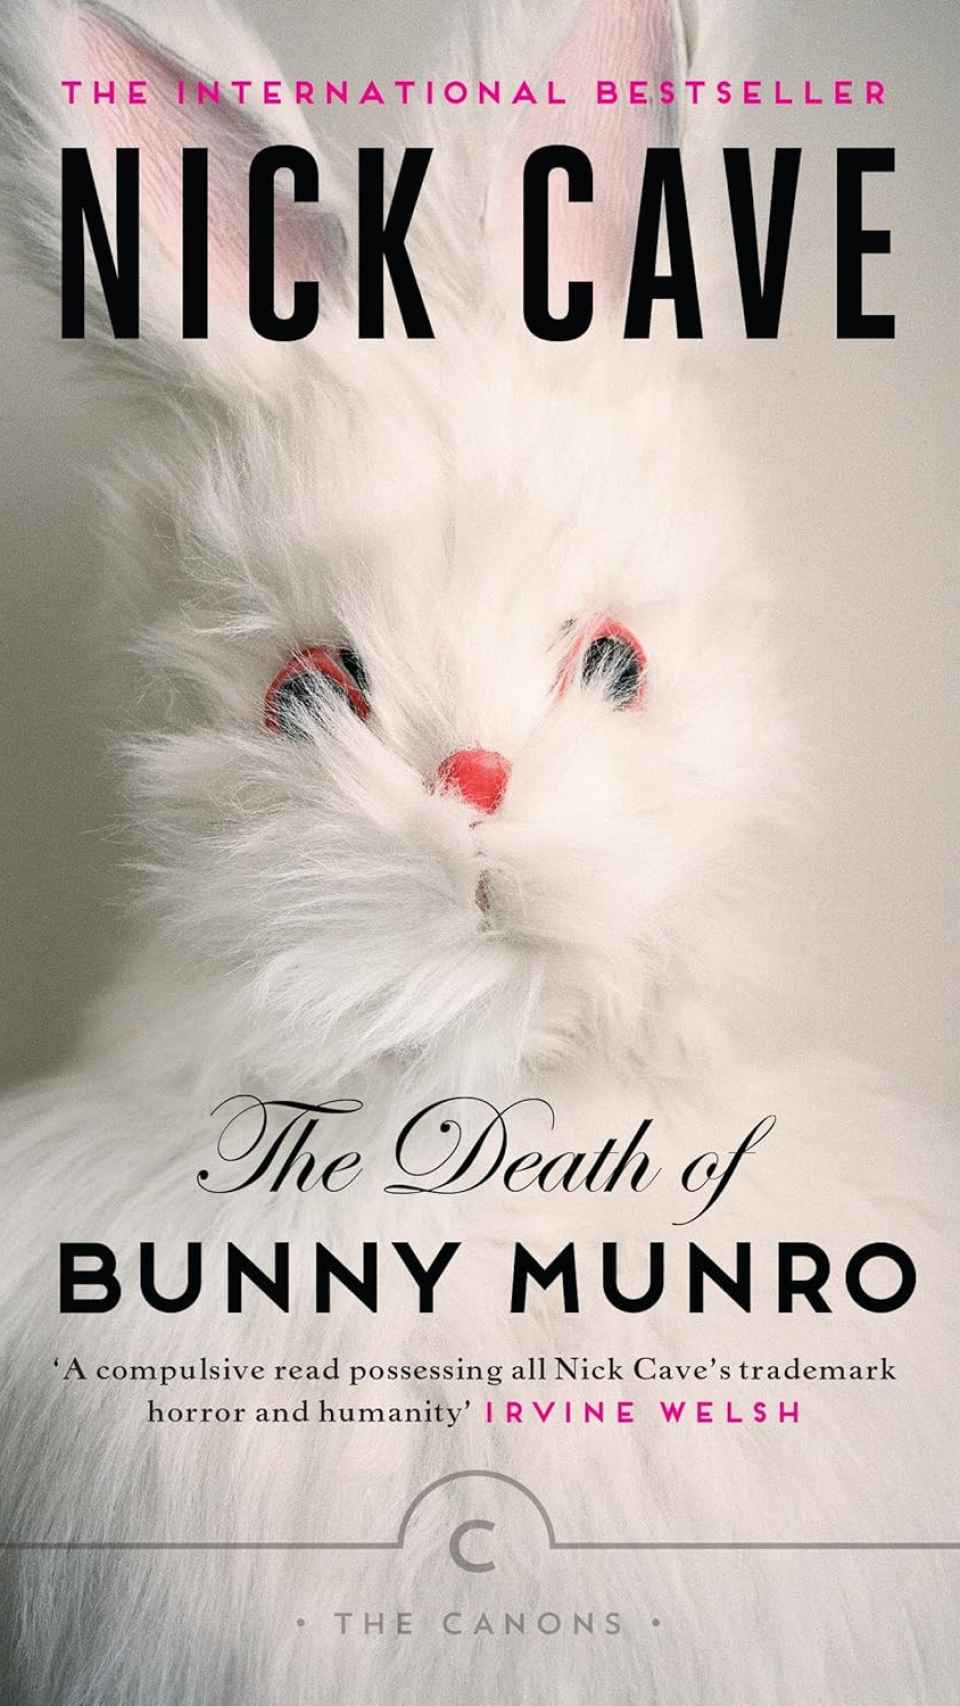 'The Death of Bunny Munro'